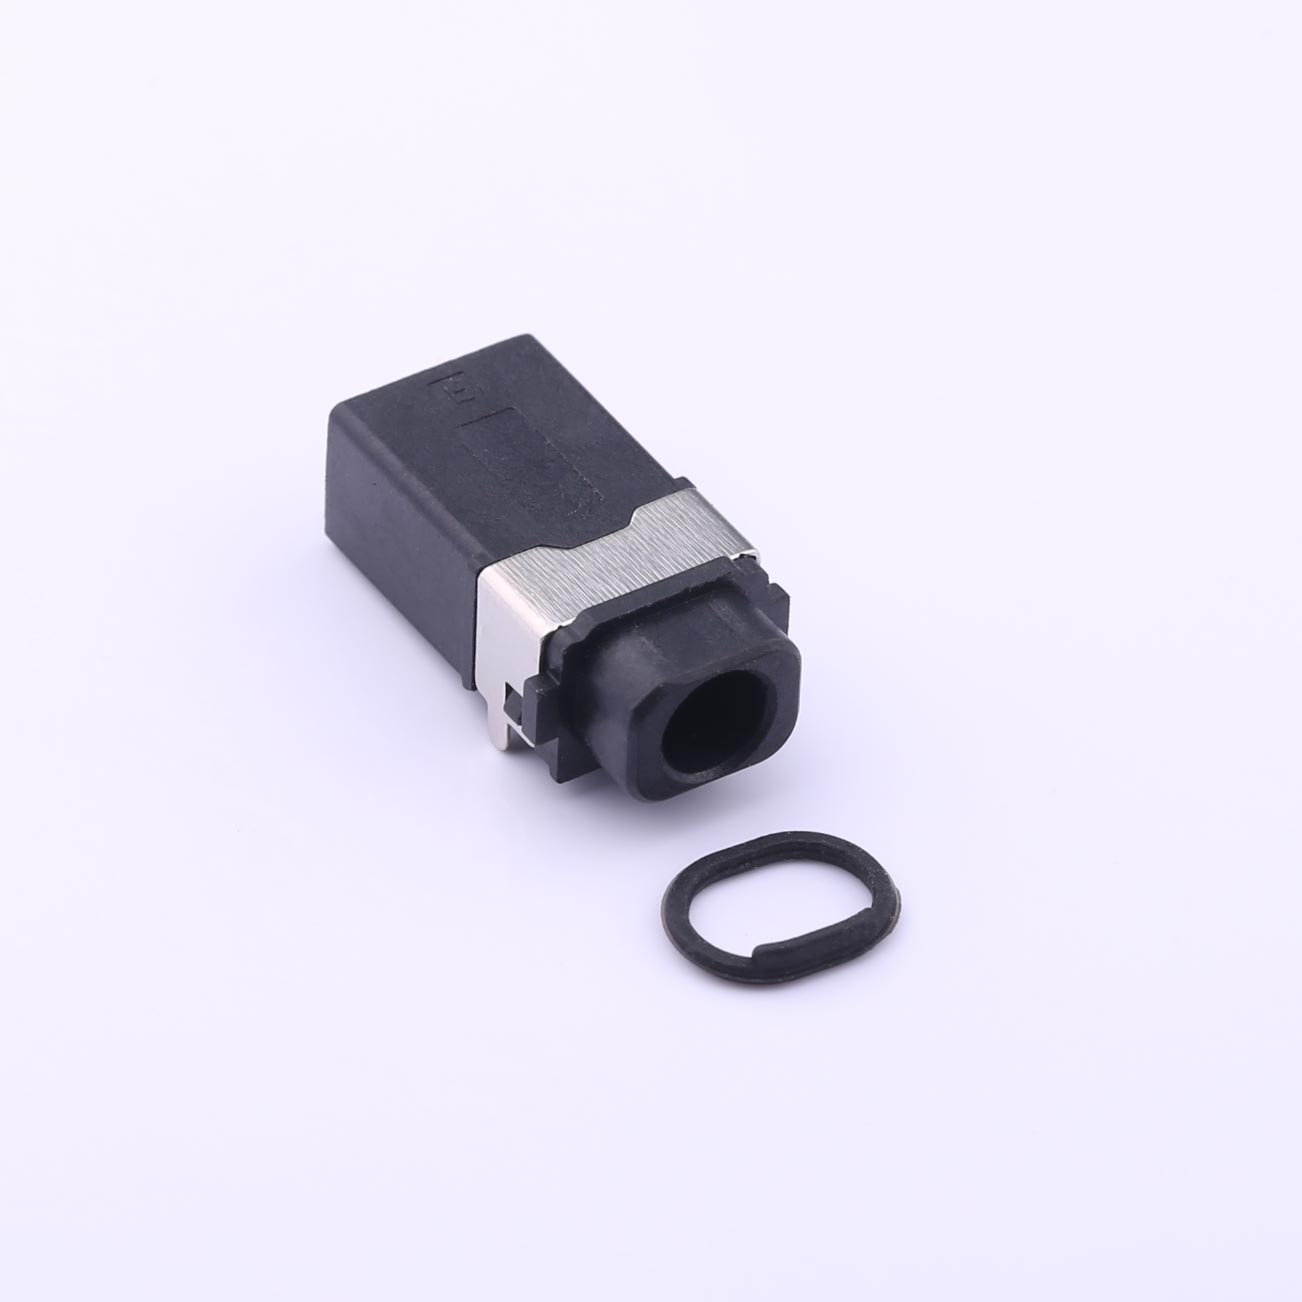 Kinghelm Audio Jack Connector 3.5mm Headphone Femal Seat Two-piece Set-  KH-35-K500-EJ-Kinghelm Electronics Co., Ltd. is leading supplier of  GPS/Beidou GNSS antenna, Bluetooth antenna, Wifi antenna, RF cable and  connectors in China.